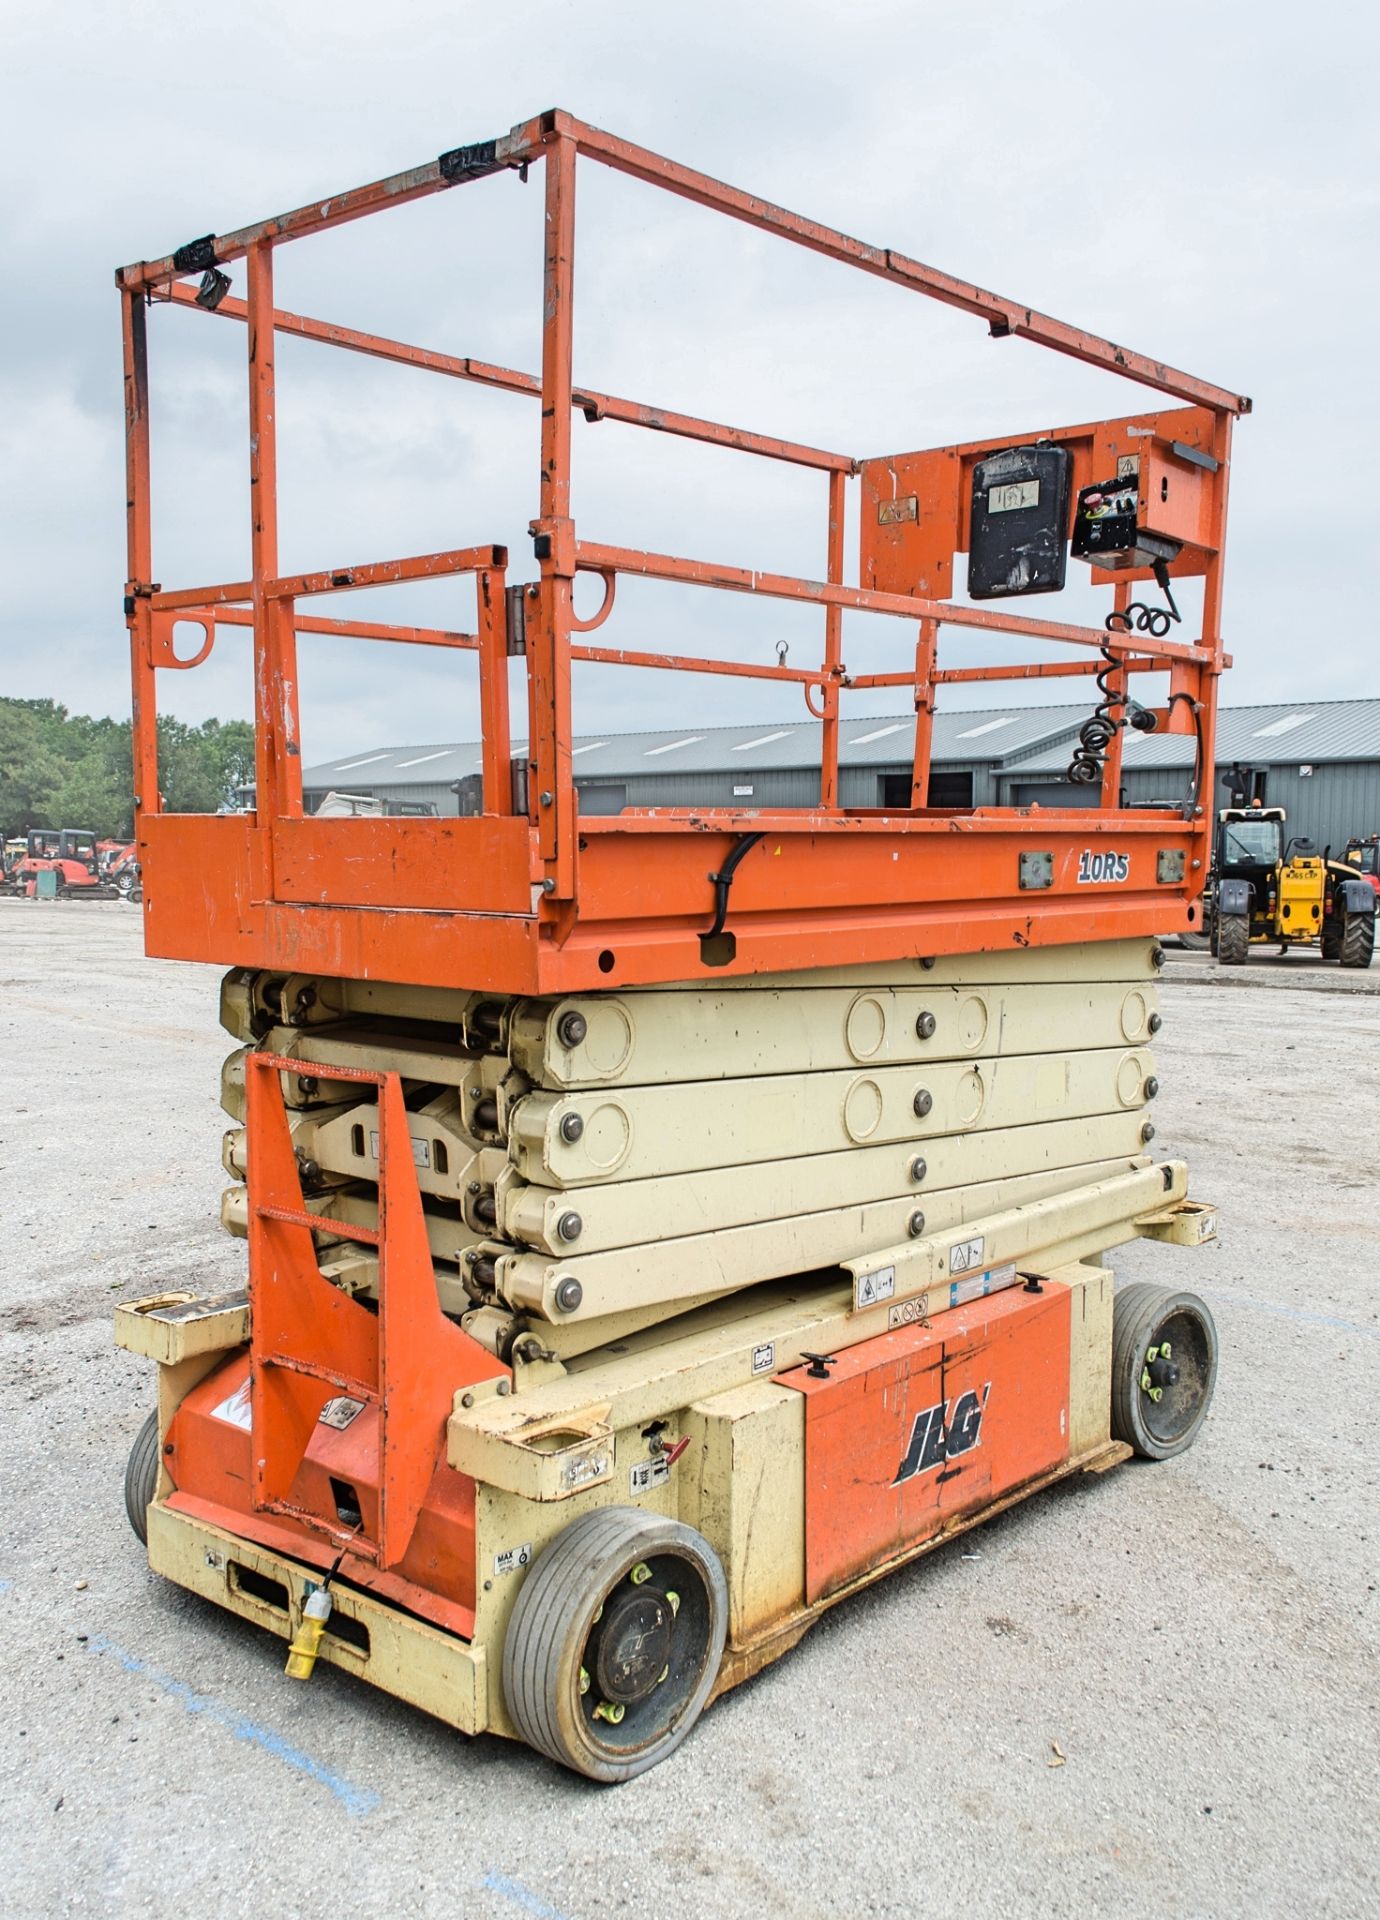 JLG 10RS battery electric scissor lift access platform Year: 2014 S/N: 16498 Recorded Hours: 369